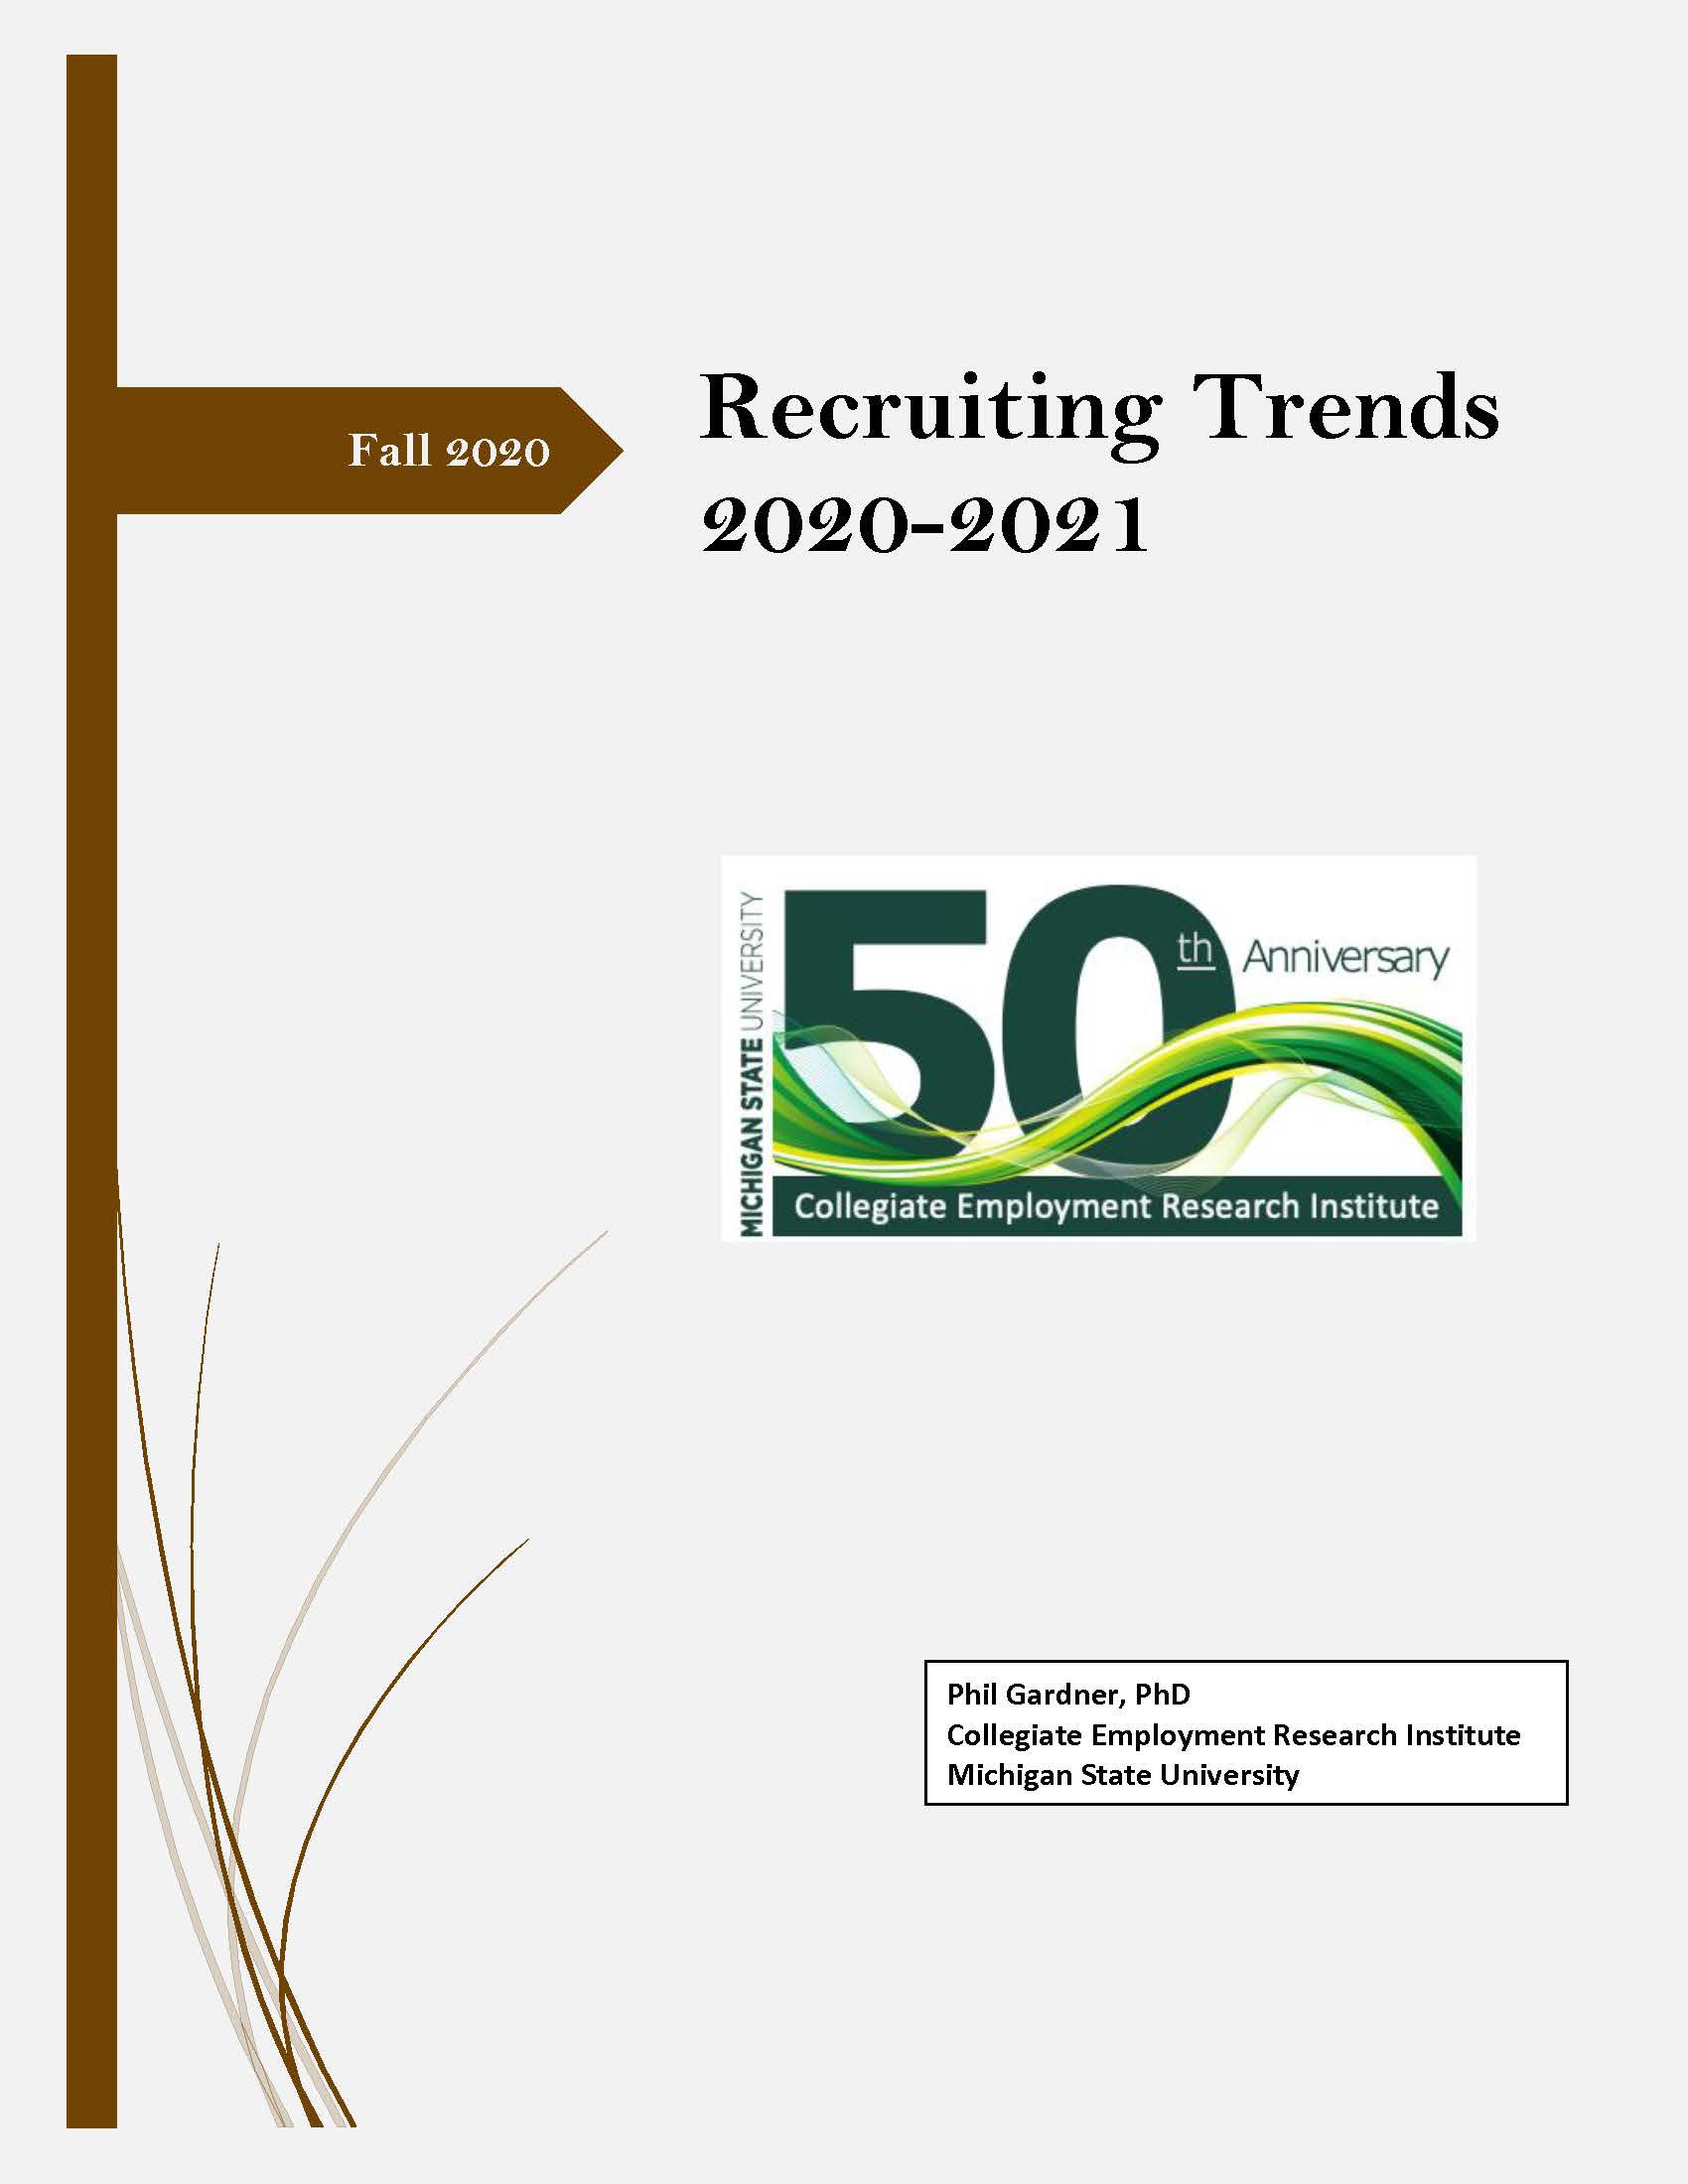 Cover image of recruiting trends report